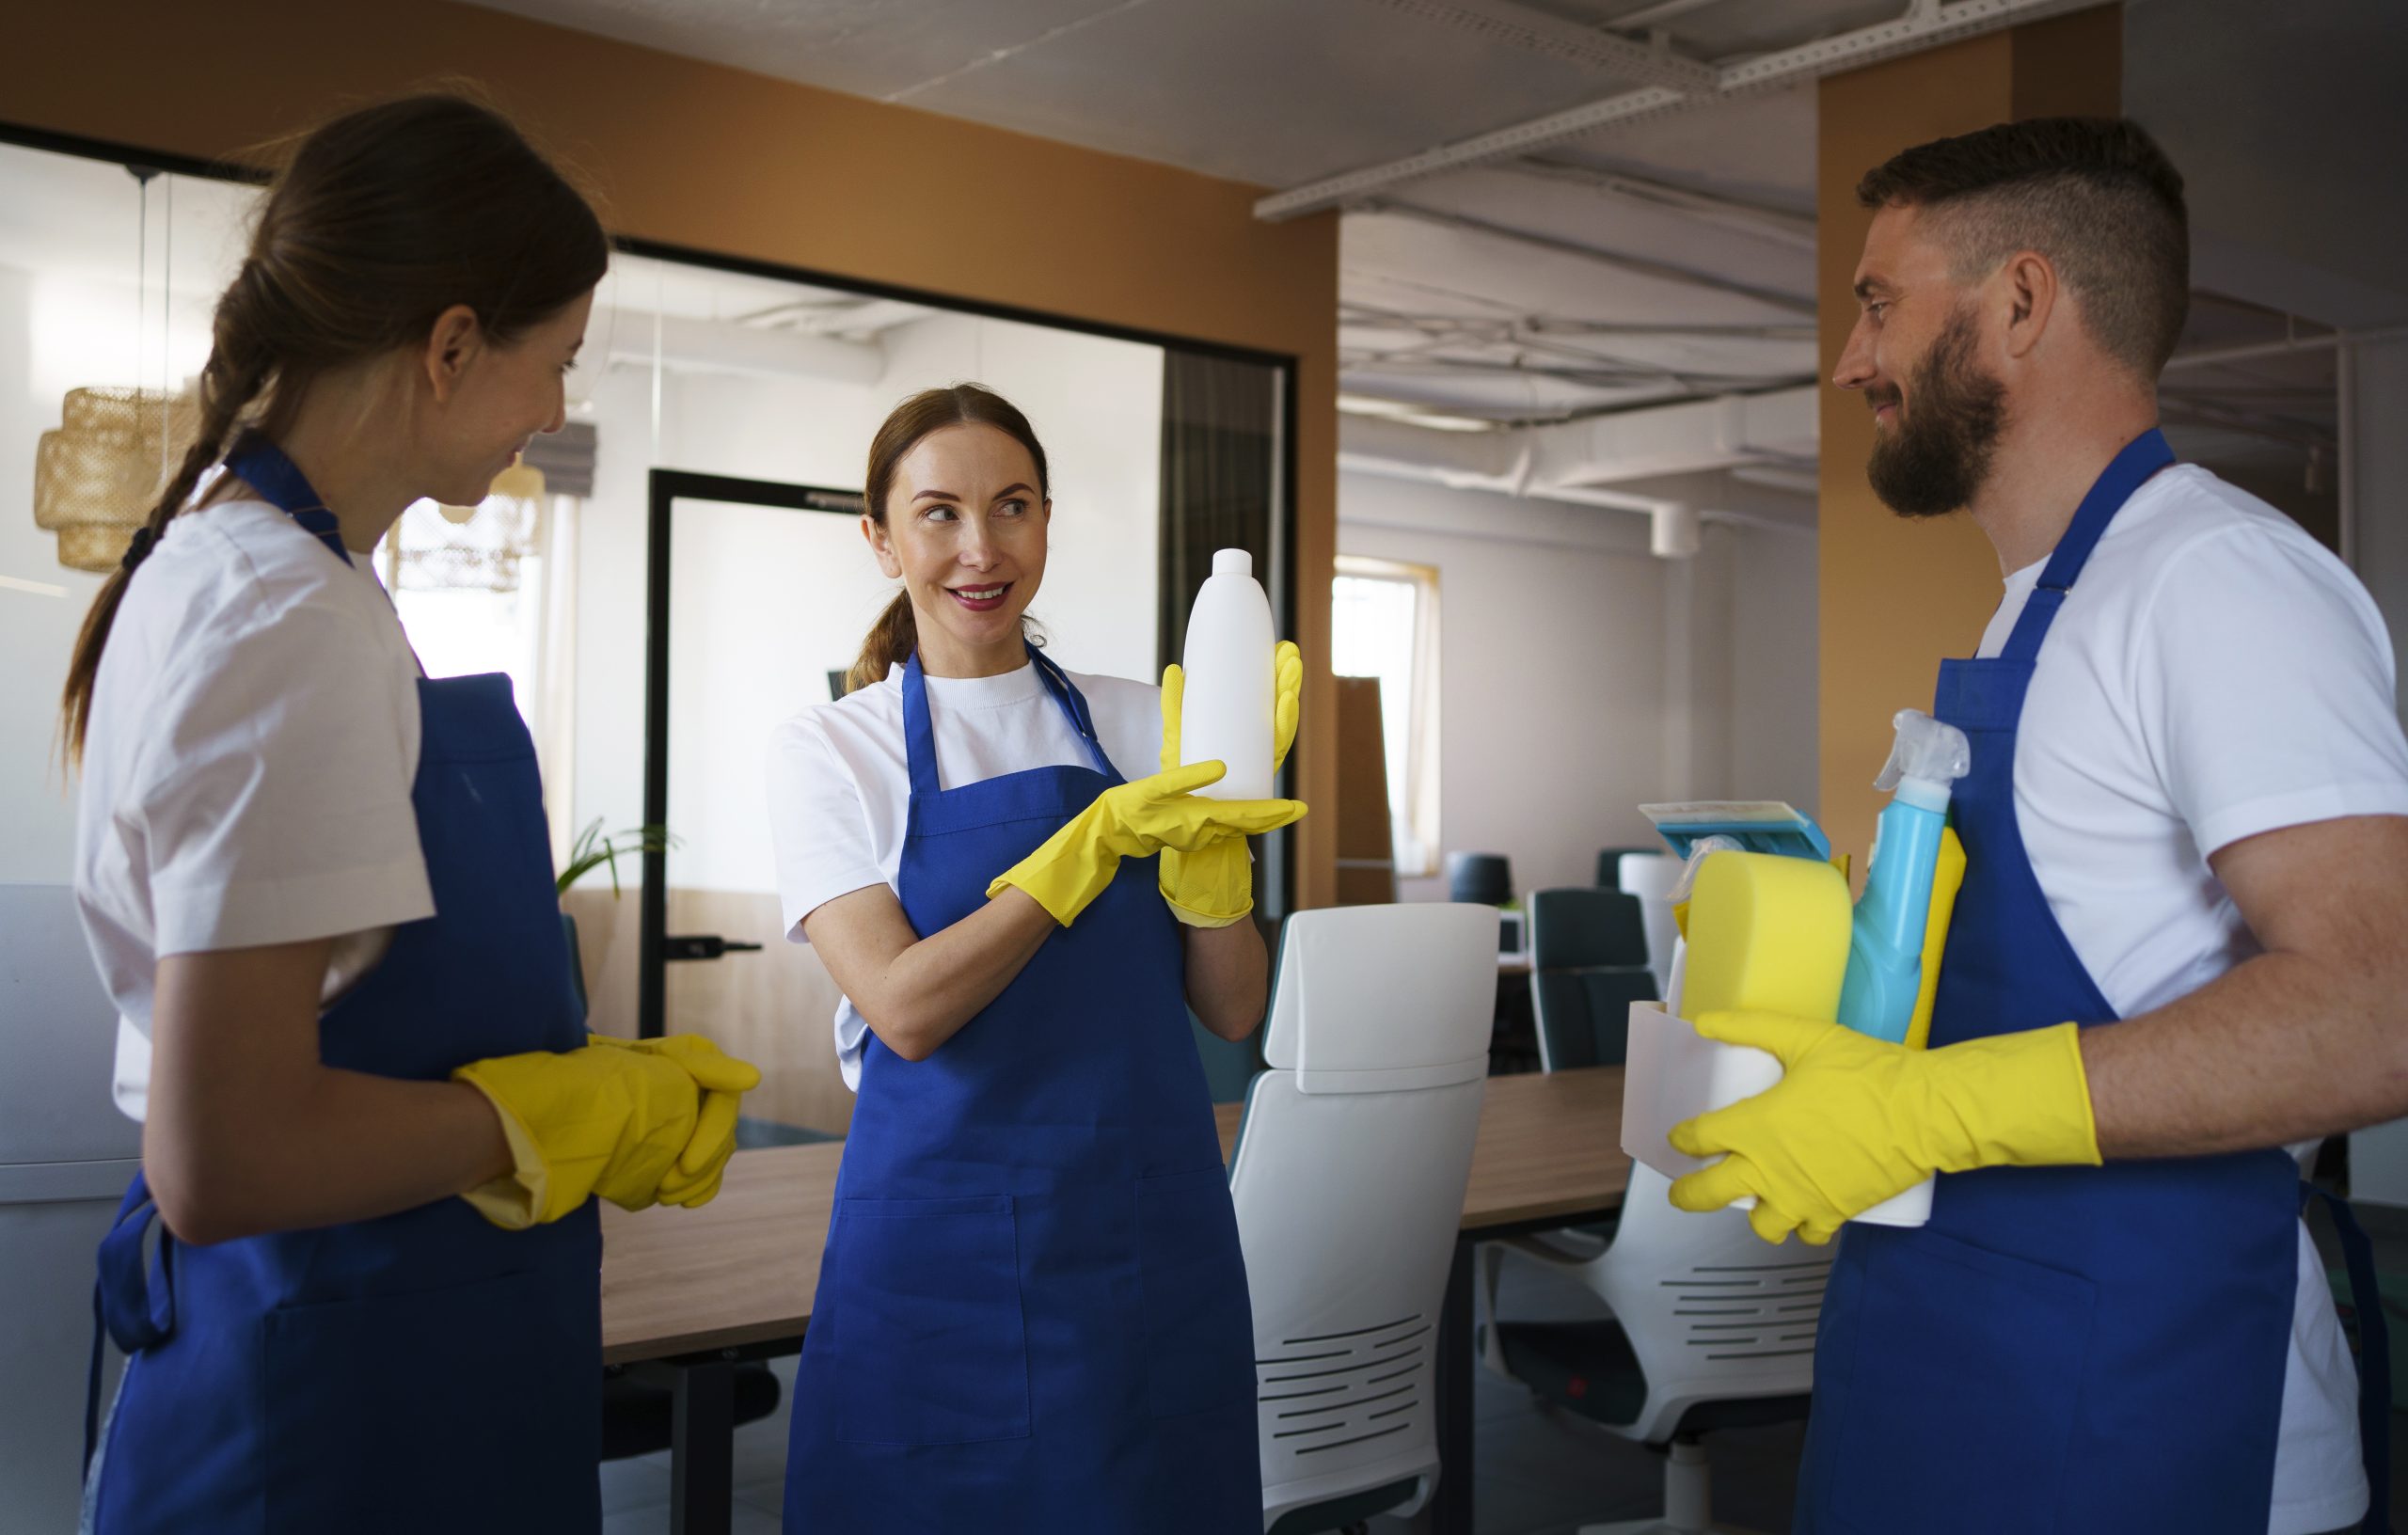 Commercial Cleaning Services Calgary 